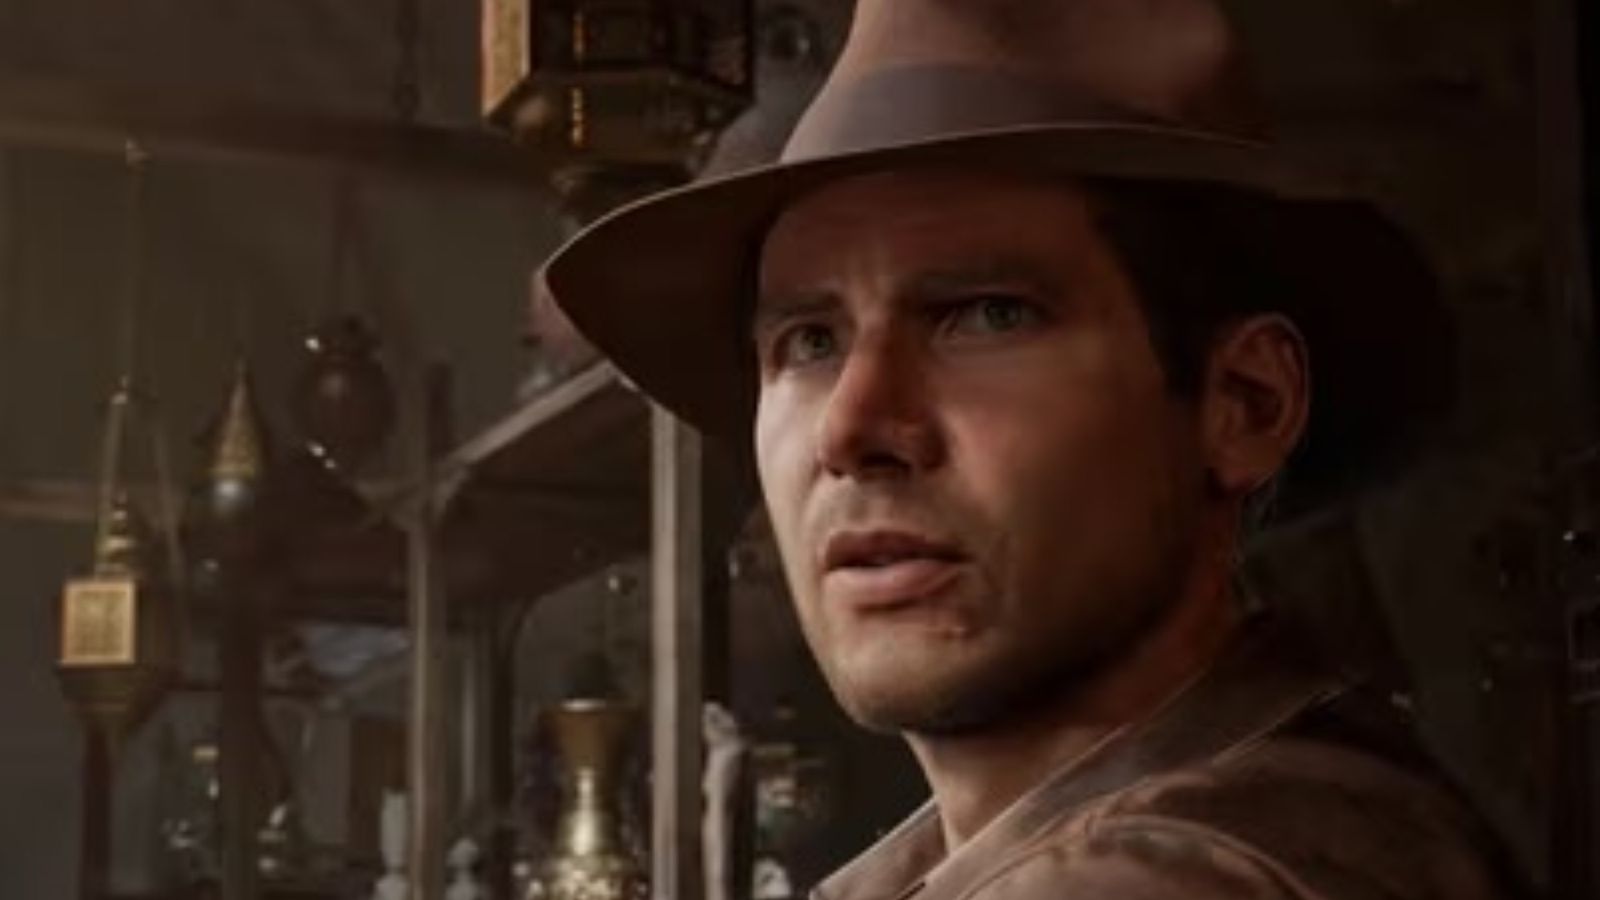 Indiana jones from the great circle game